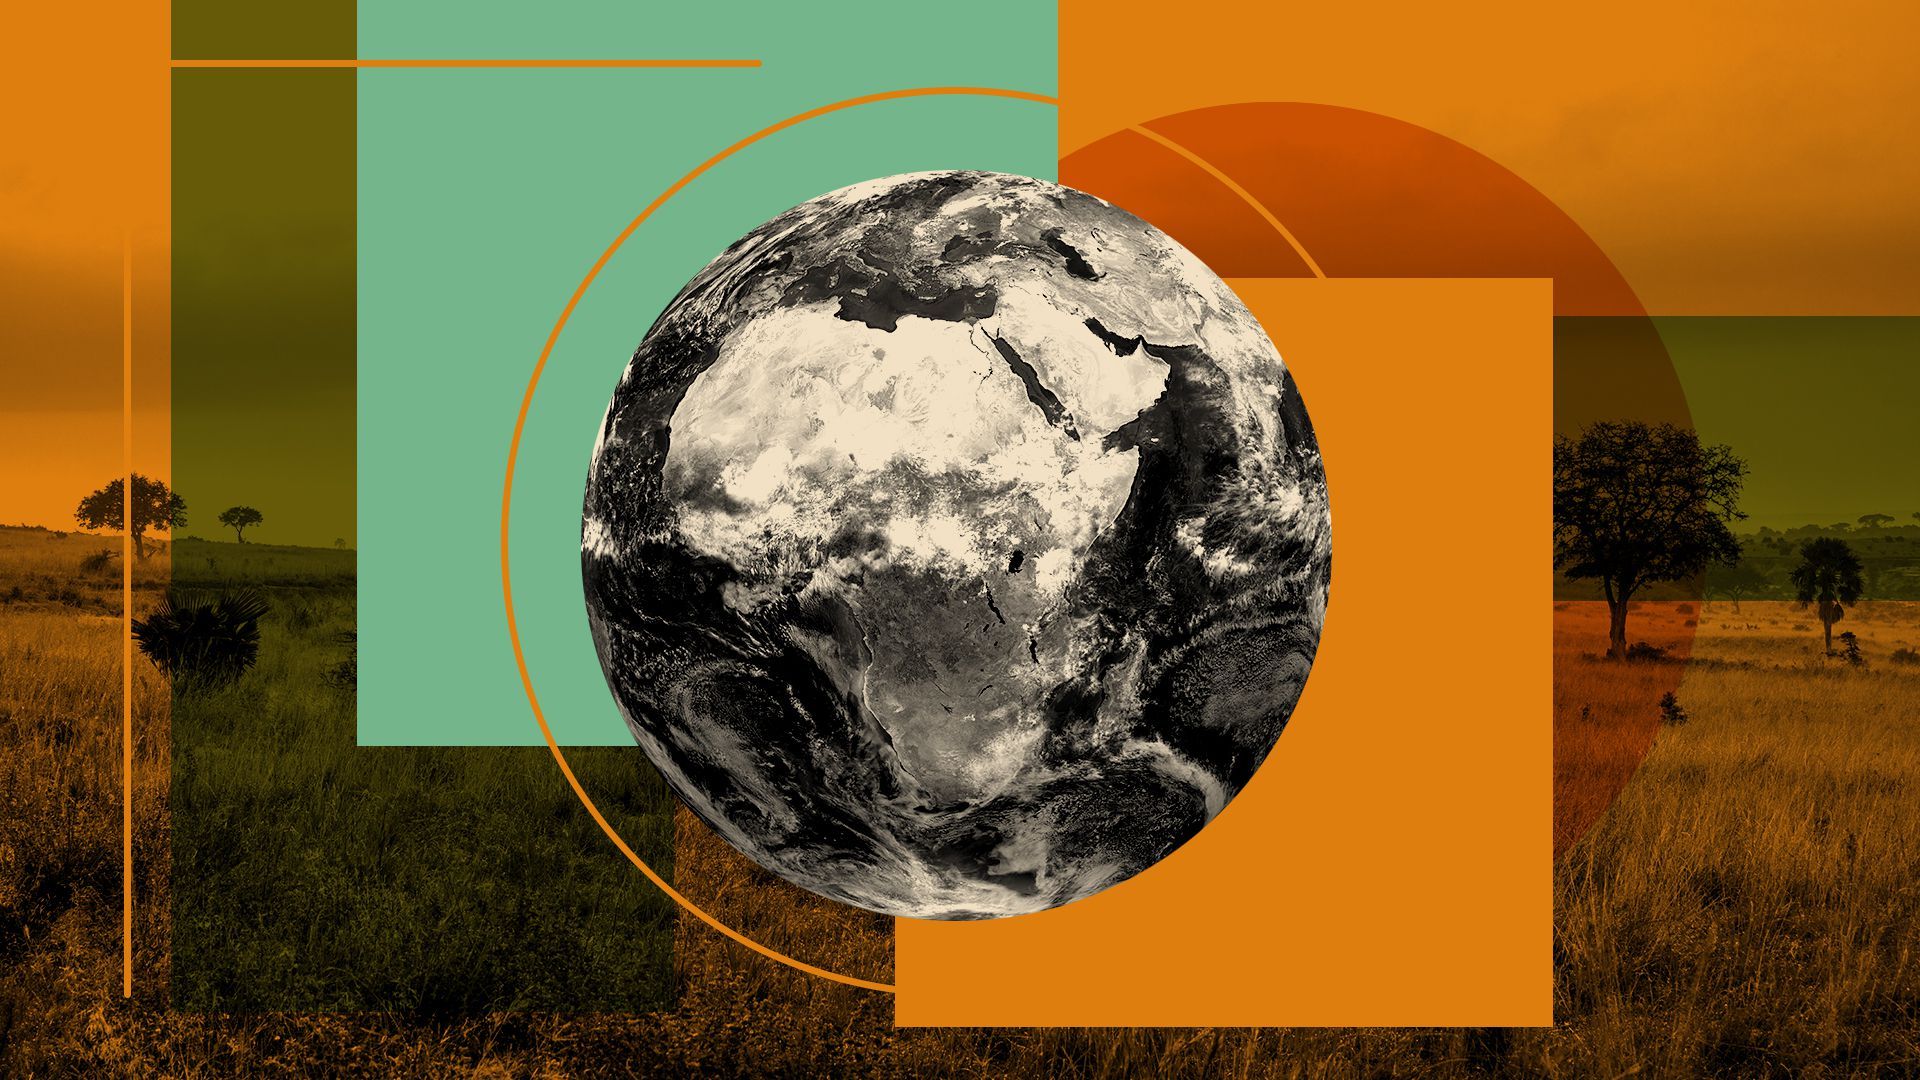 Illustration collage of a globe turned towards Africa, in front of an image of Murchison Falls National Park in Uganda, as well as graphic shapes.